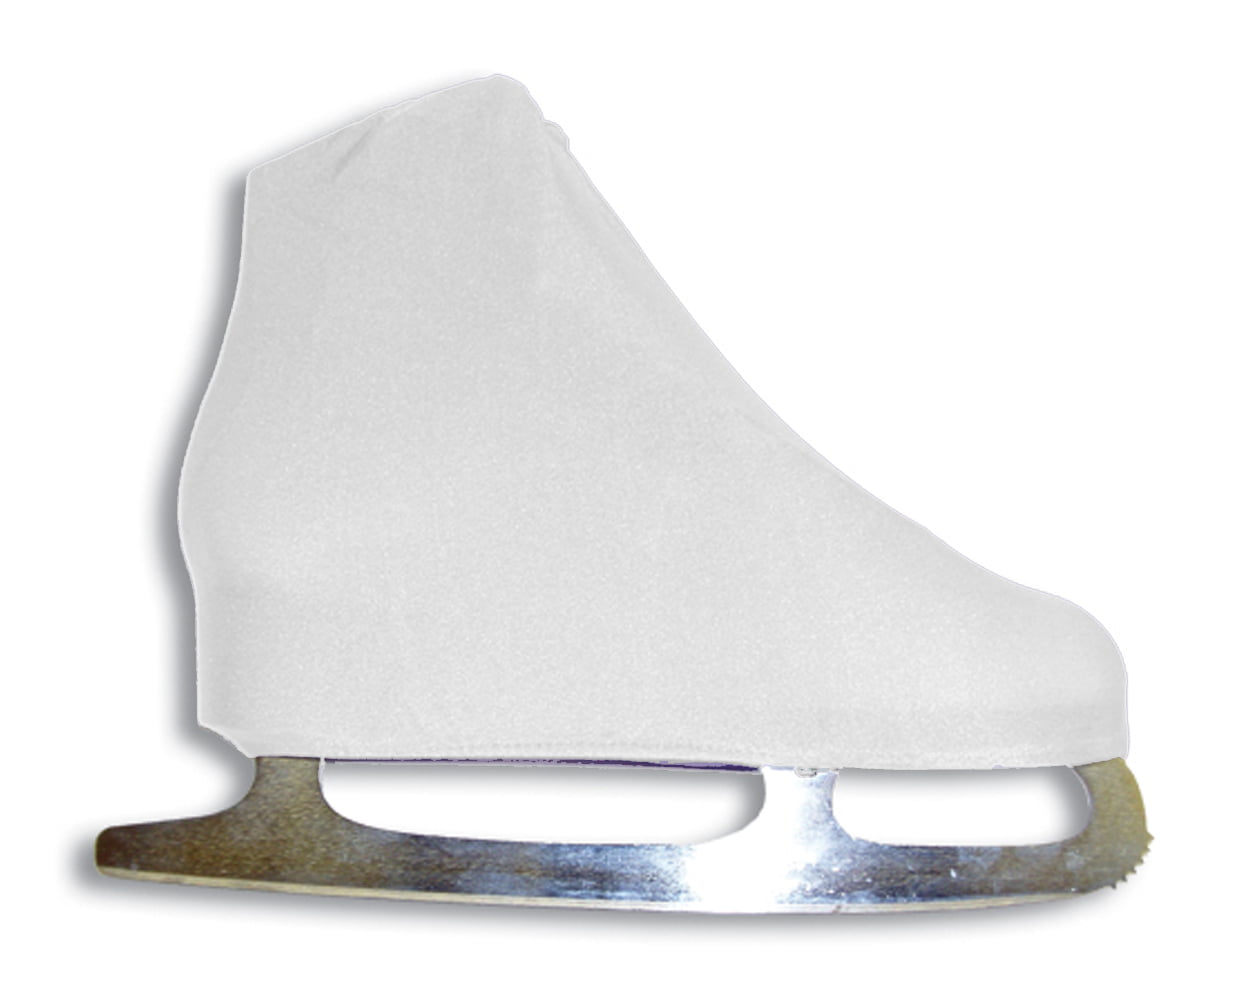 A&R Figure Ice Skate Lycra & Nylon Boot Covers Protect Skates One Size Fits Most